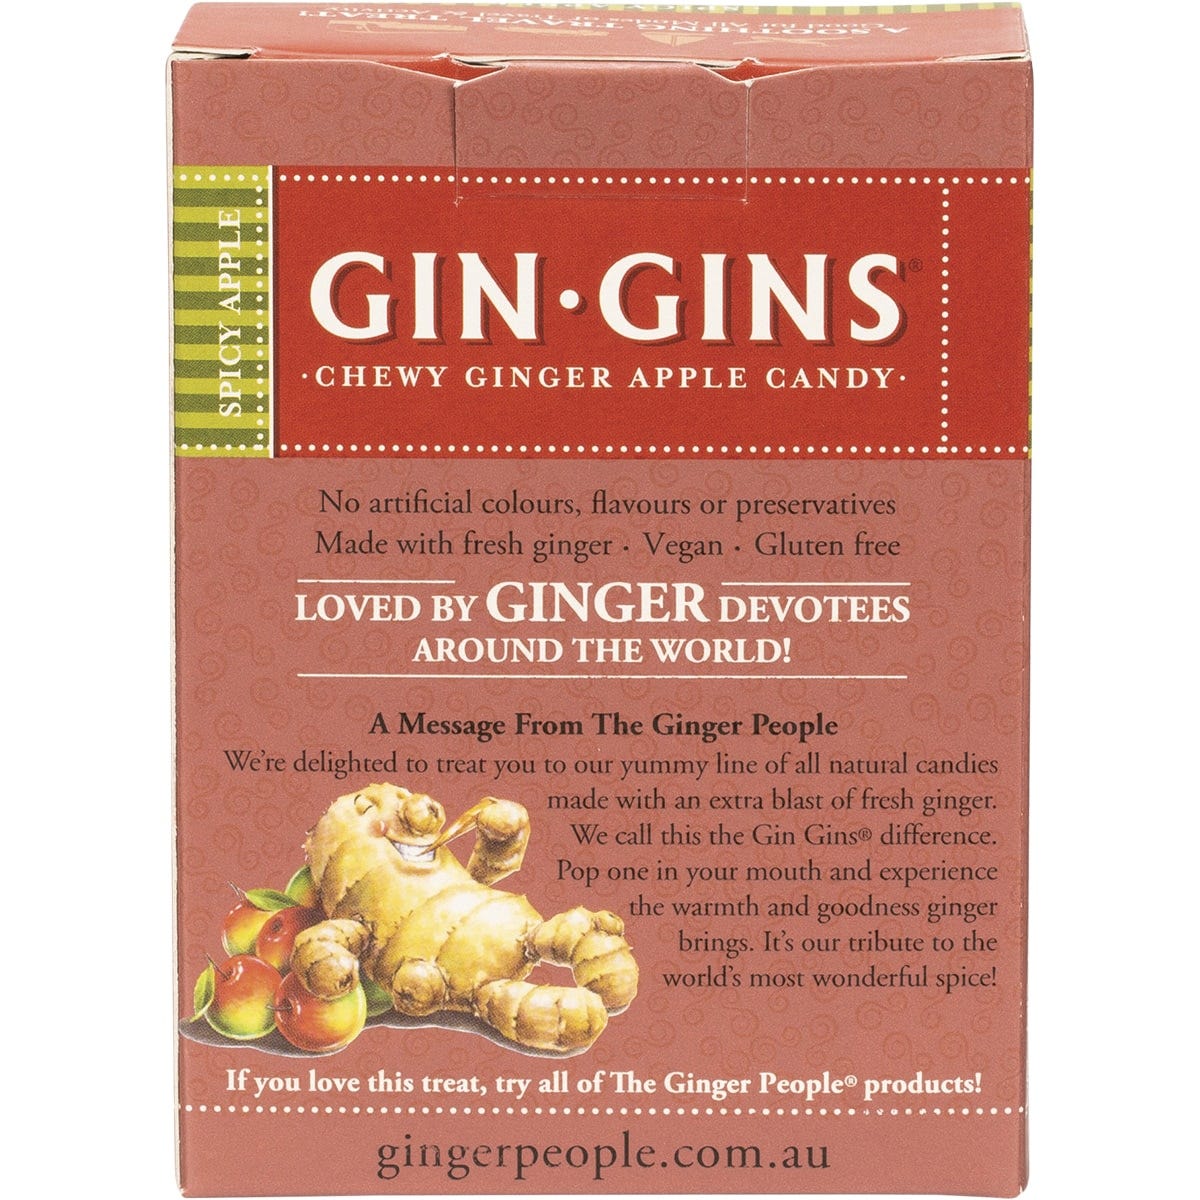 The Ginger People Gin Gins Ginger Candy Chewy Spicy Apple 84g - Dr Earth - Confectionary